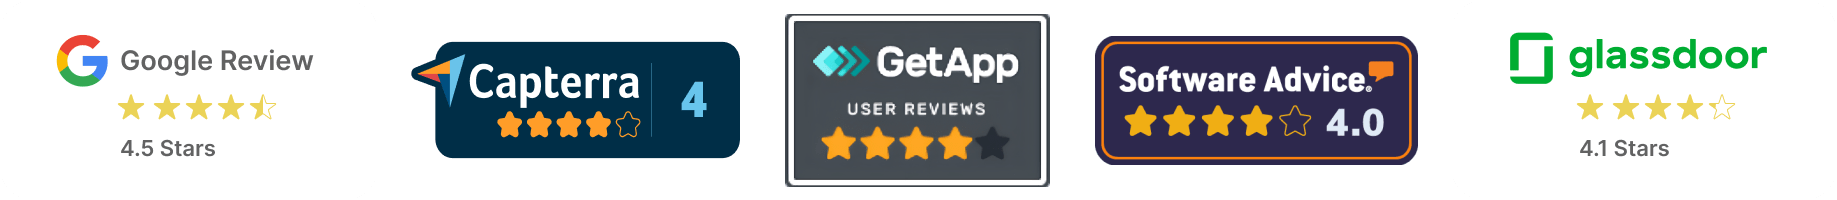 Highly Rated by Users on Top Review Platforms